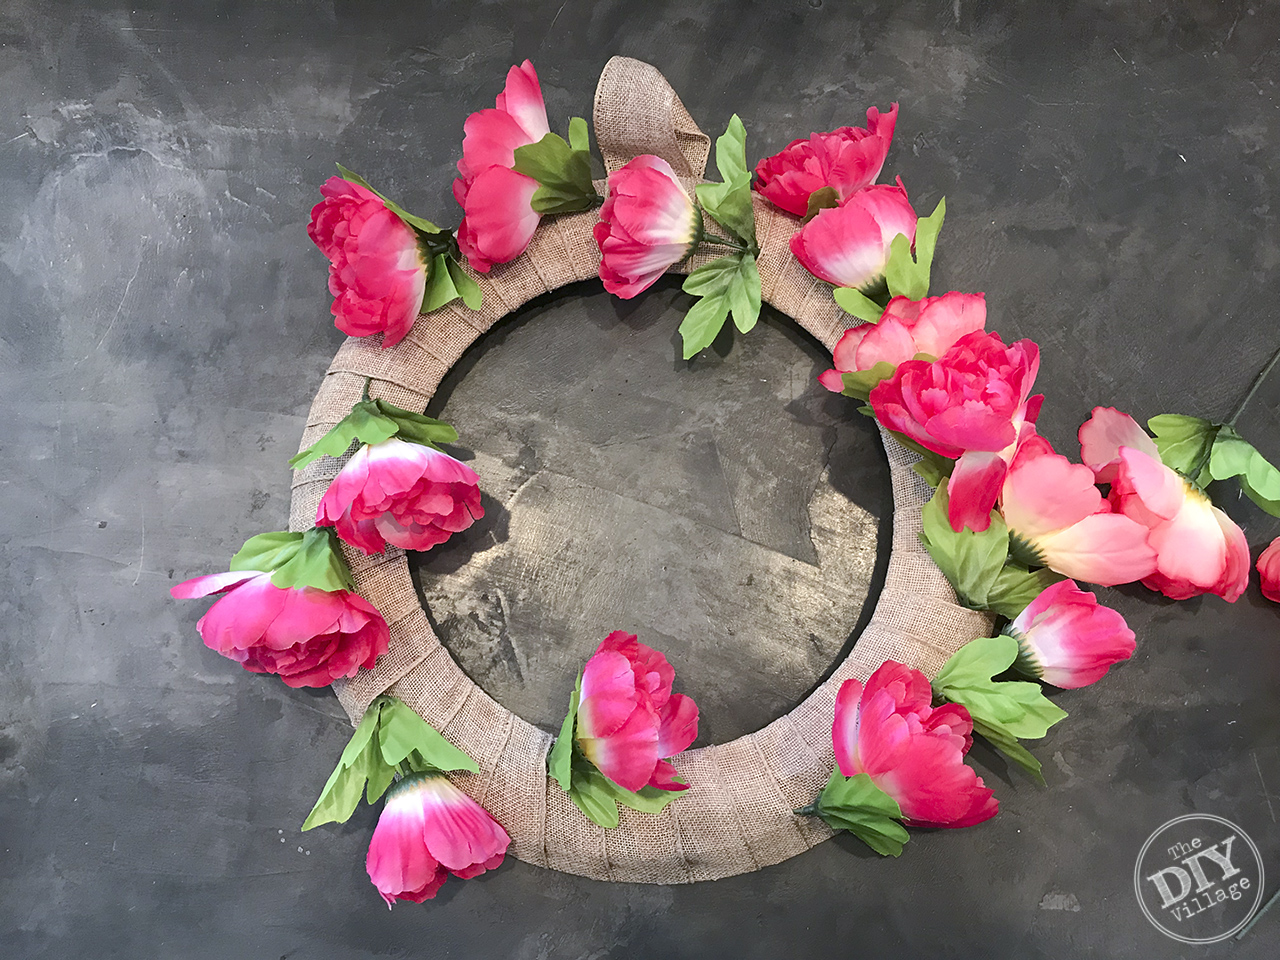 Easy pink peony wreath for under $15 #dollarstore #crafts #wreath #peony #DIY #spring #pink #frontdoors #howto